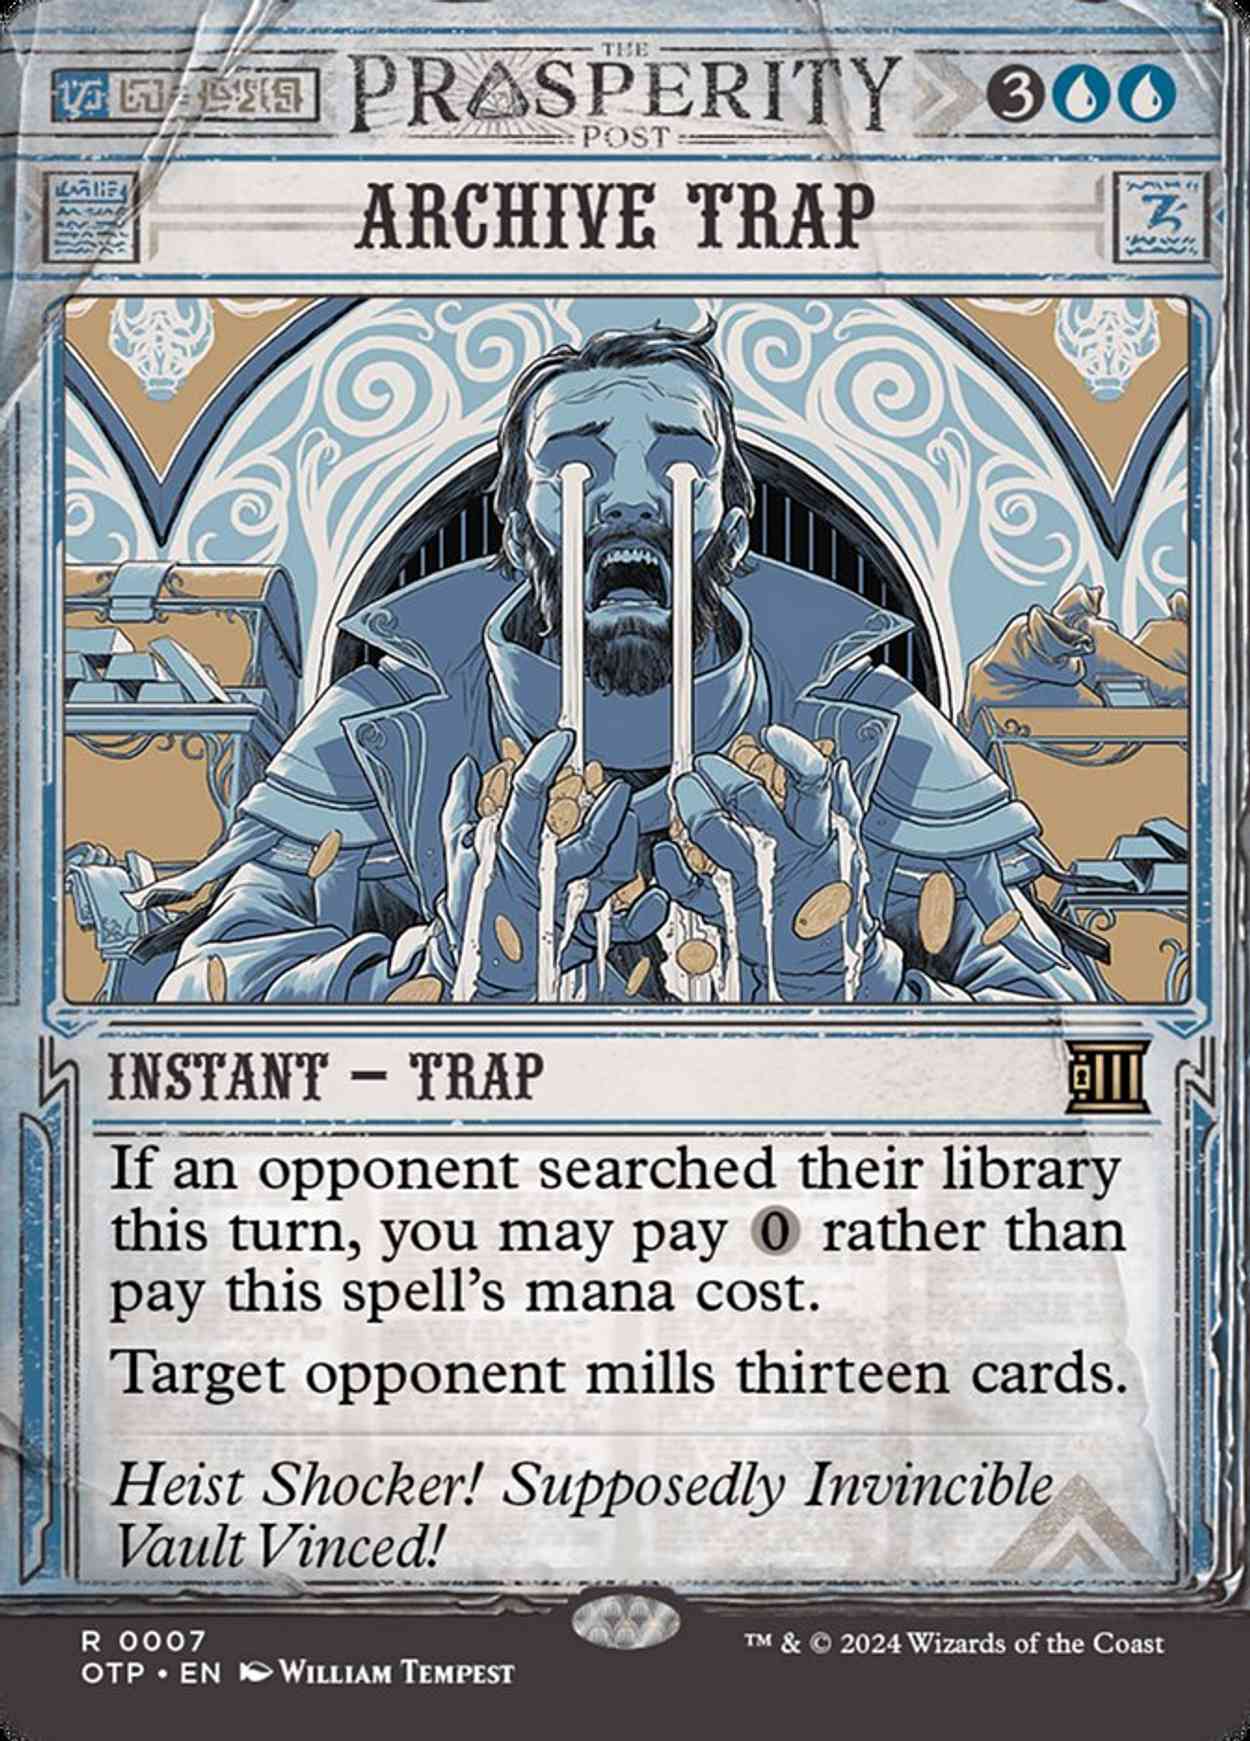 Archive Trap magic card front